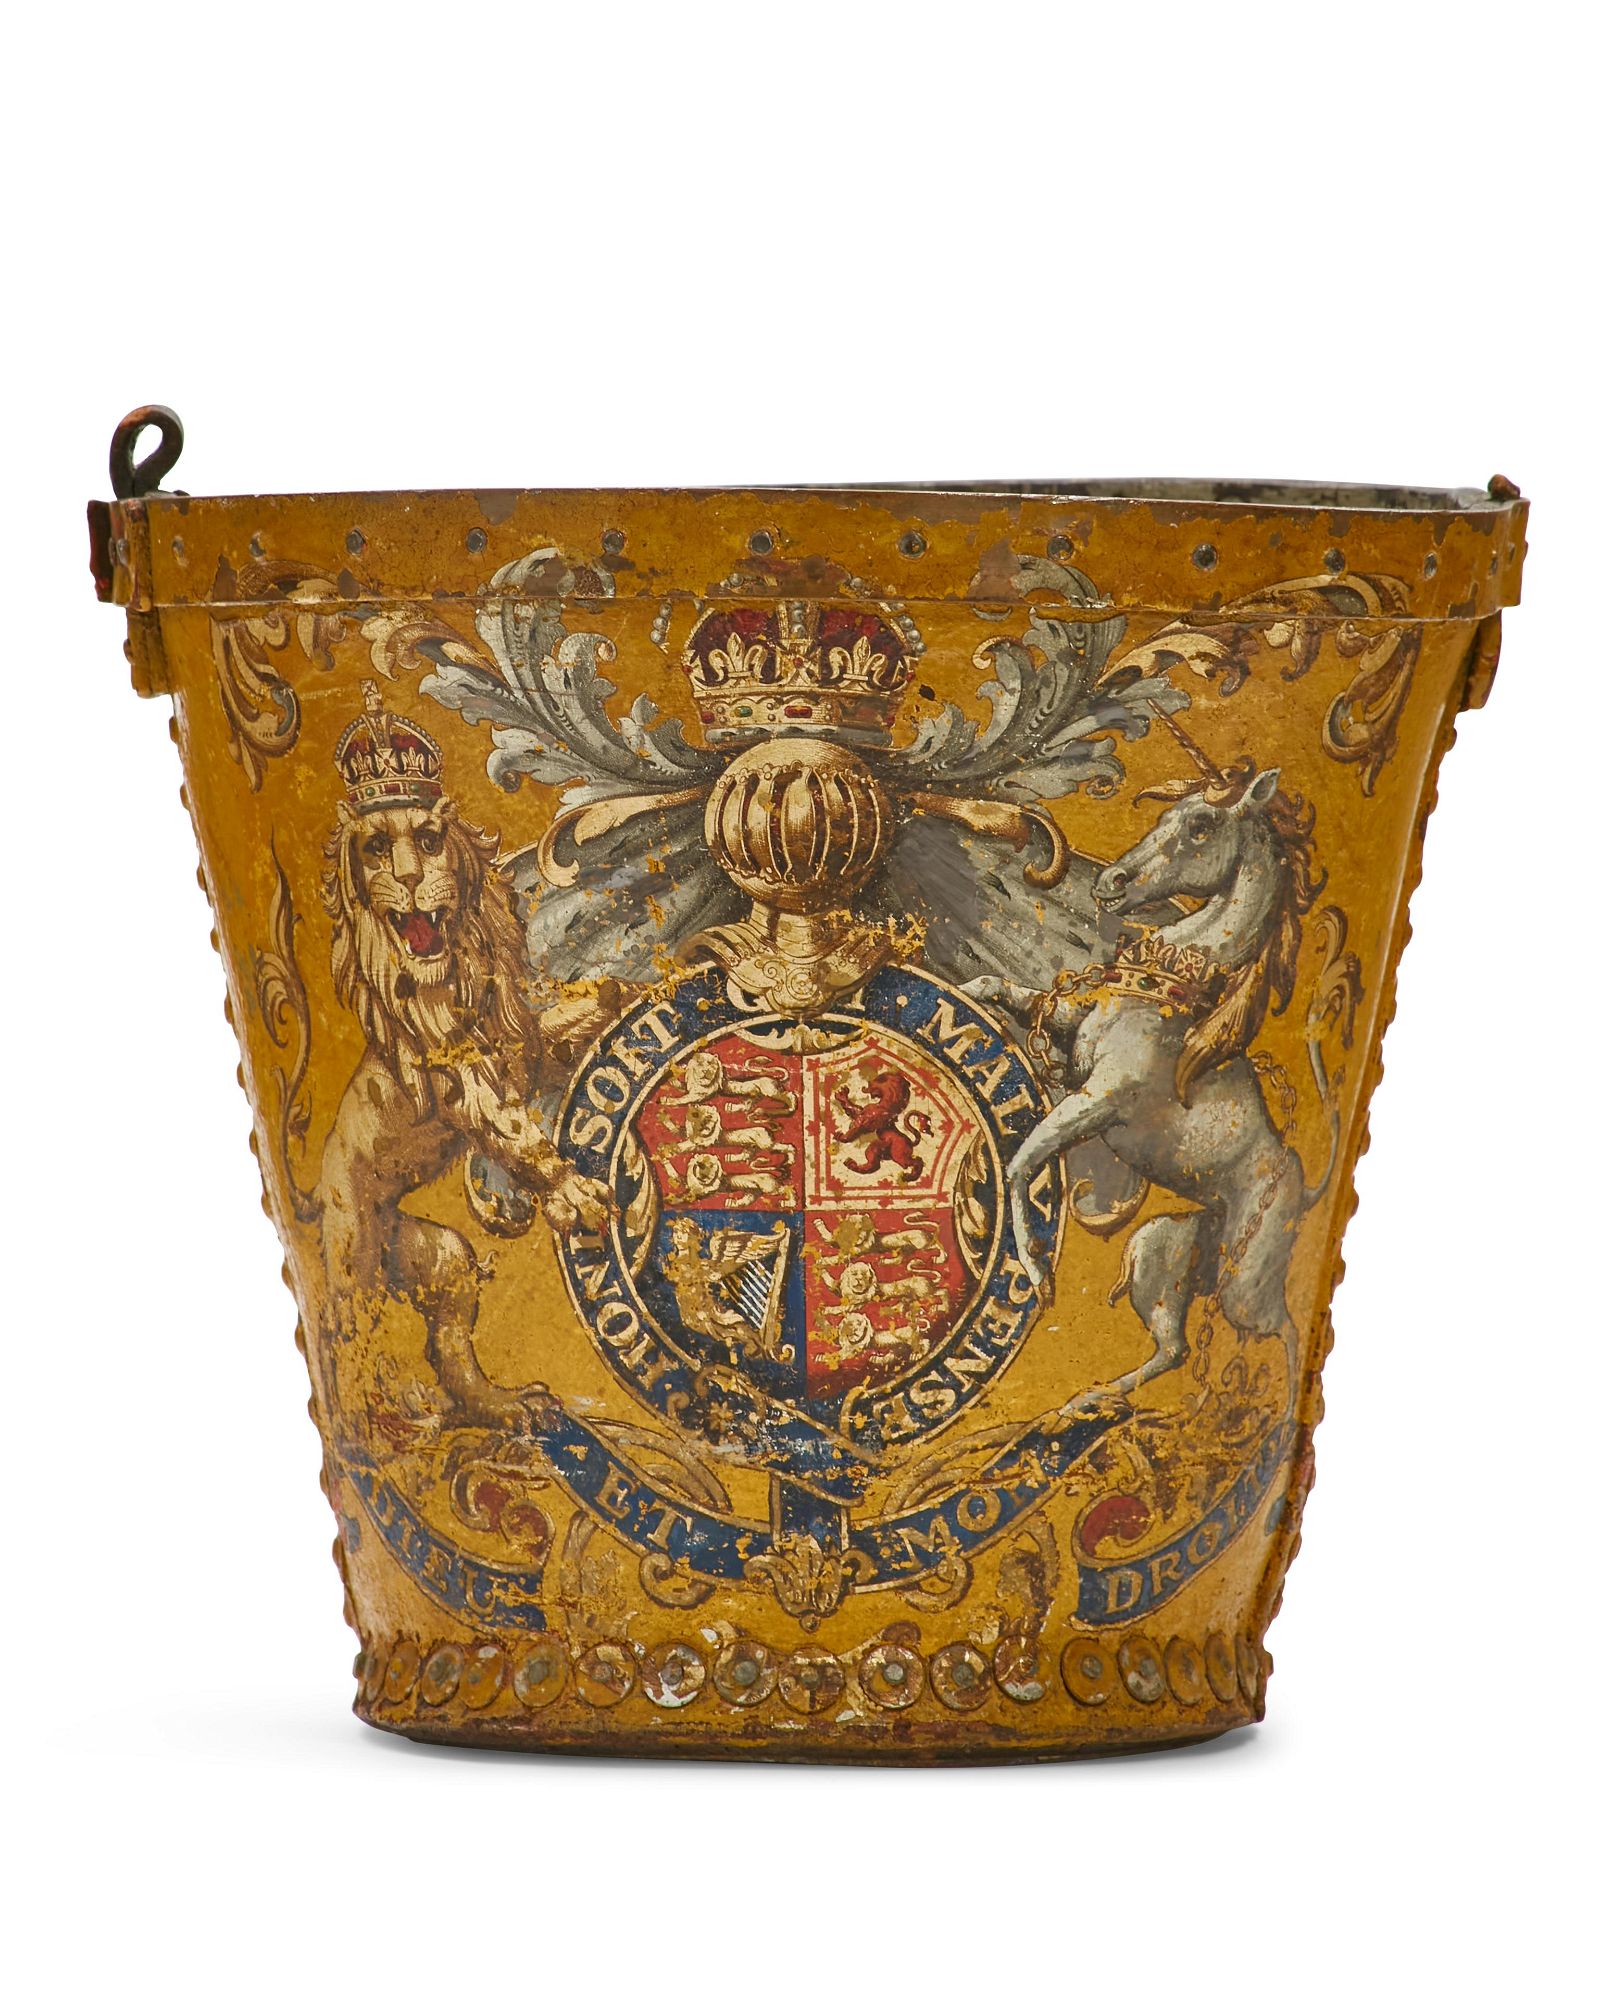 A GEORGE III YELLOW PAINTED LEATHER